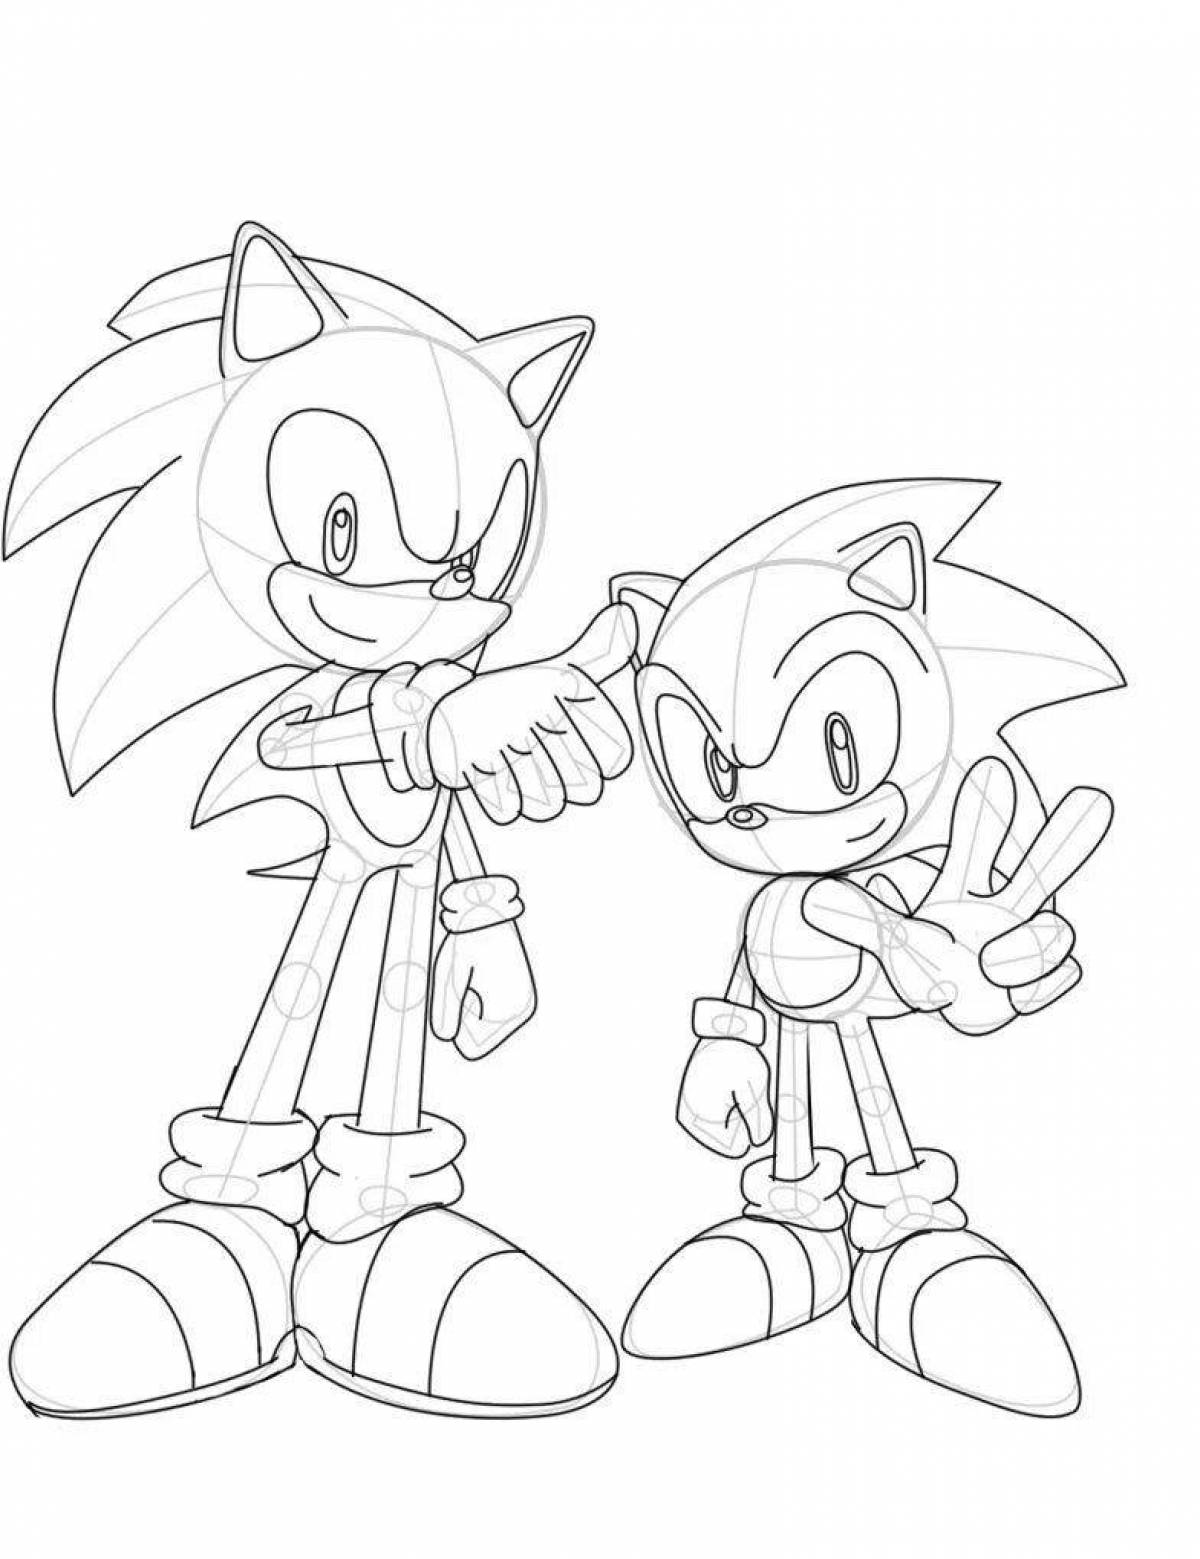 Attractive sonic classic coloring